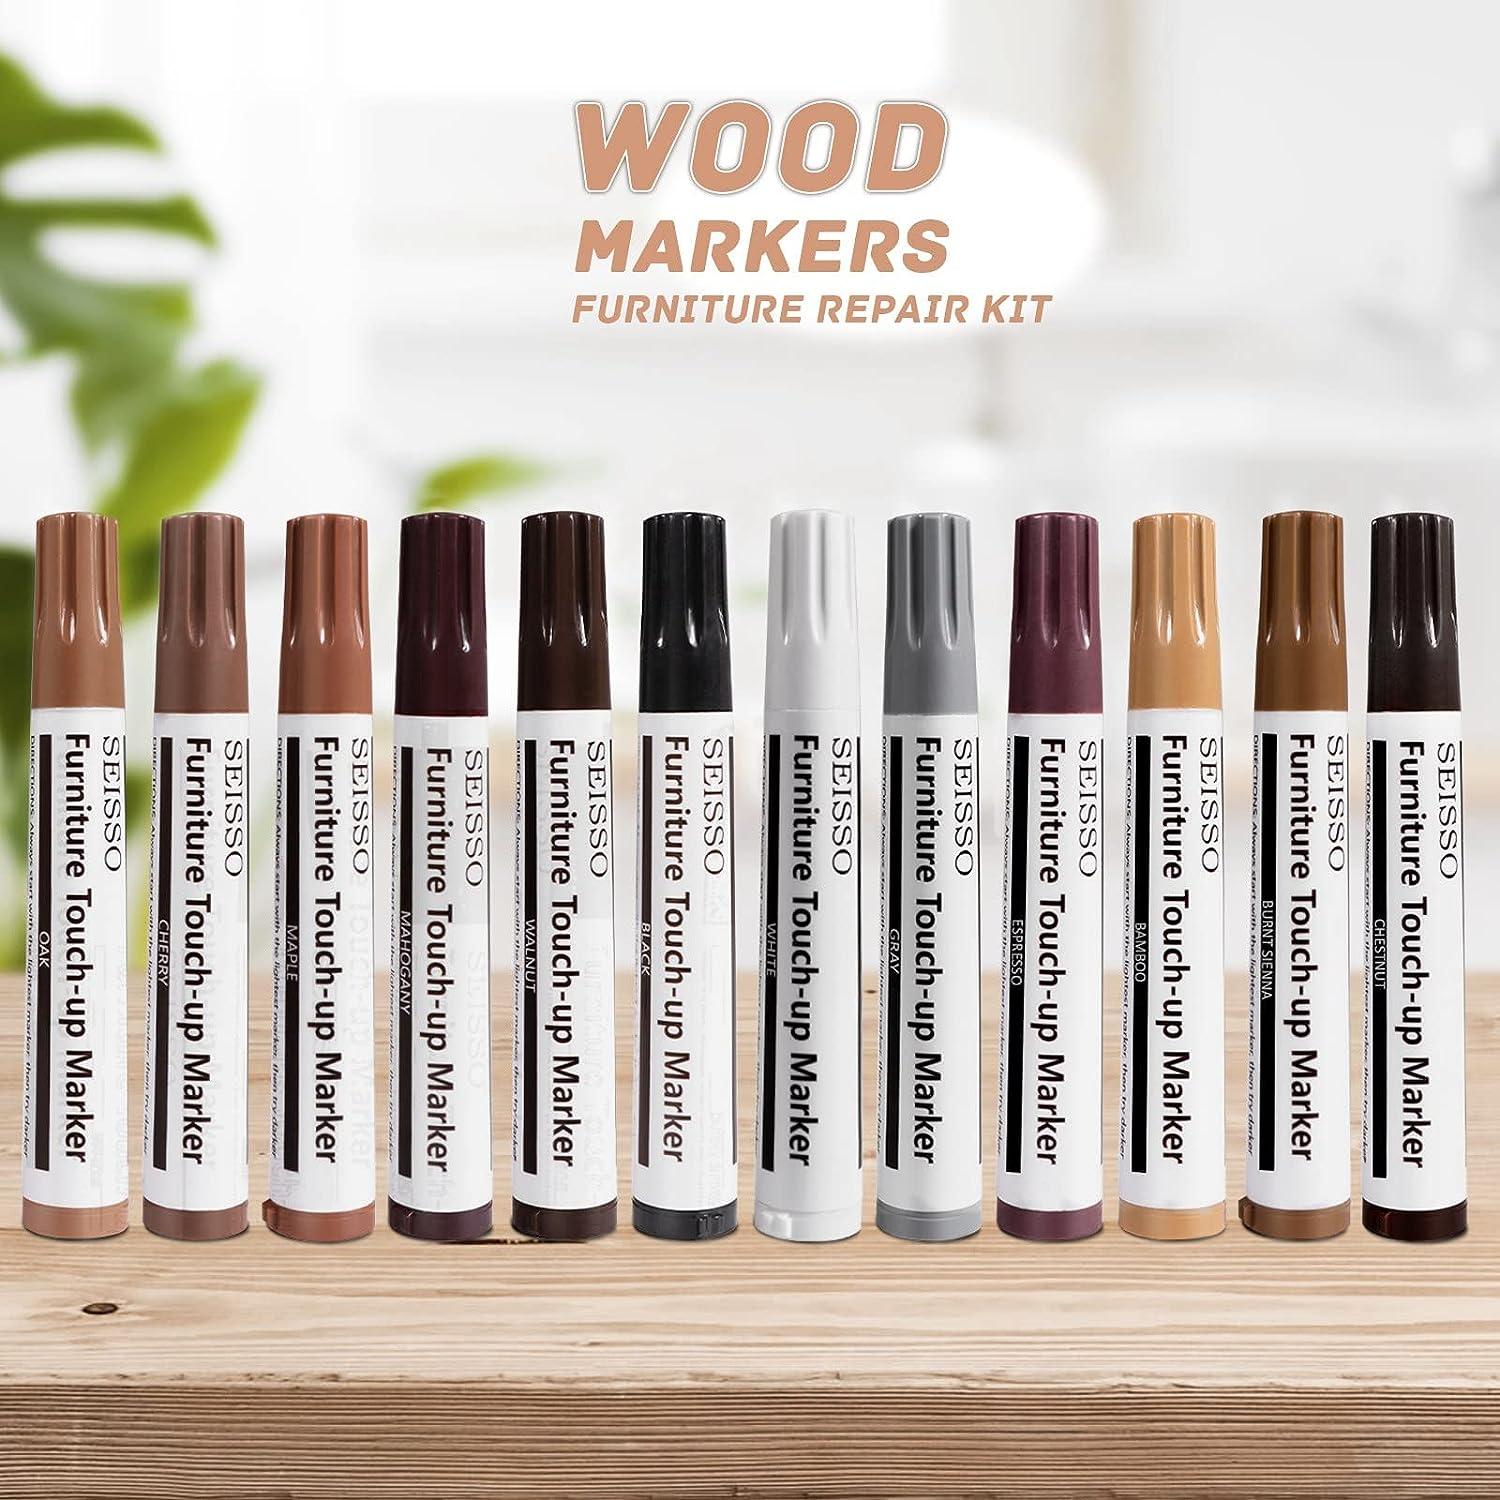 SEISSO Furniture Touch Up Markers, Wood Repair Kit for Furniture